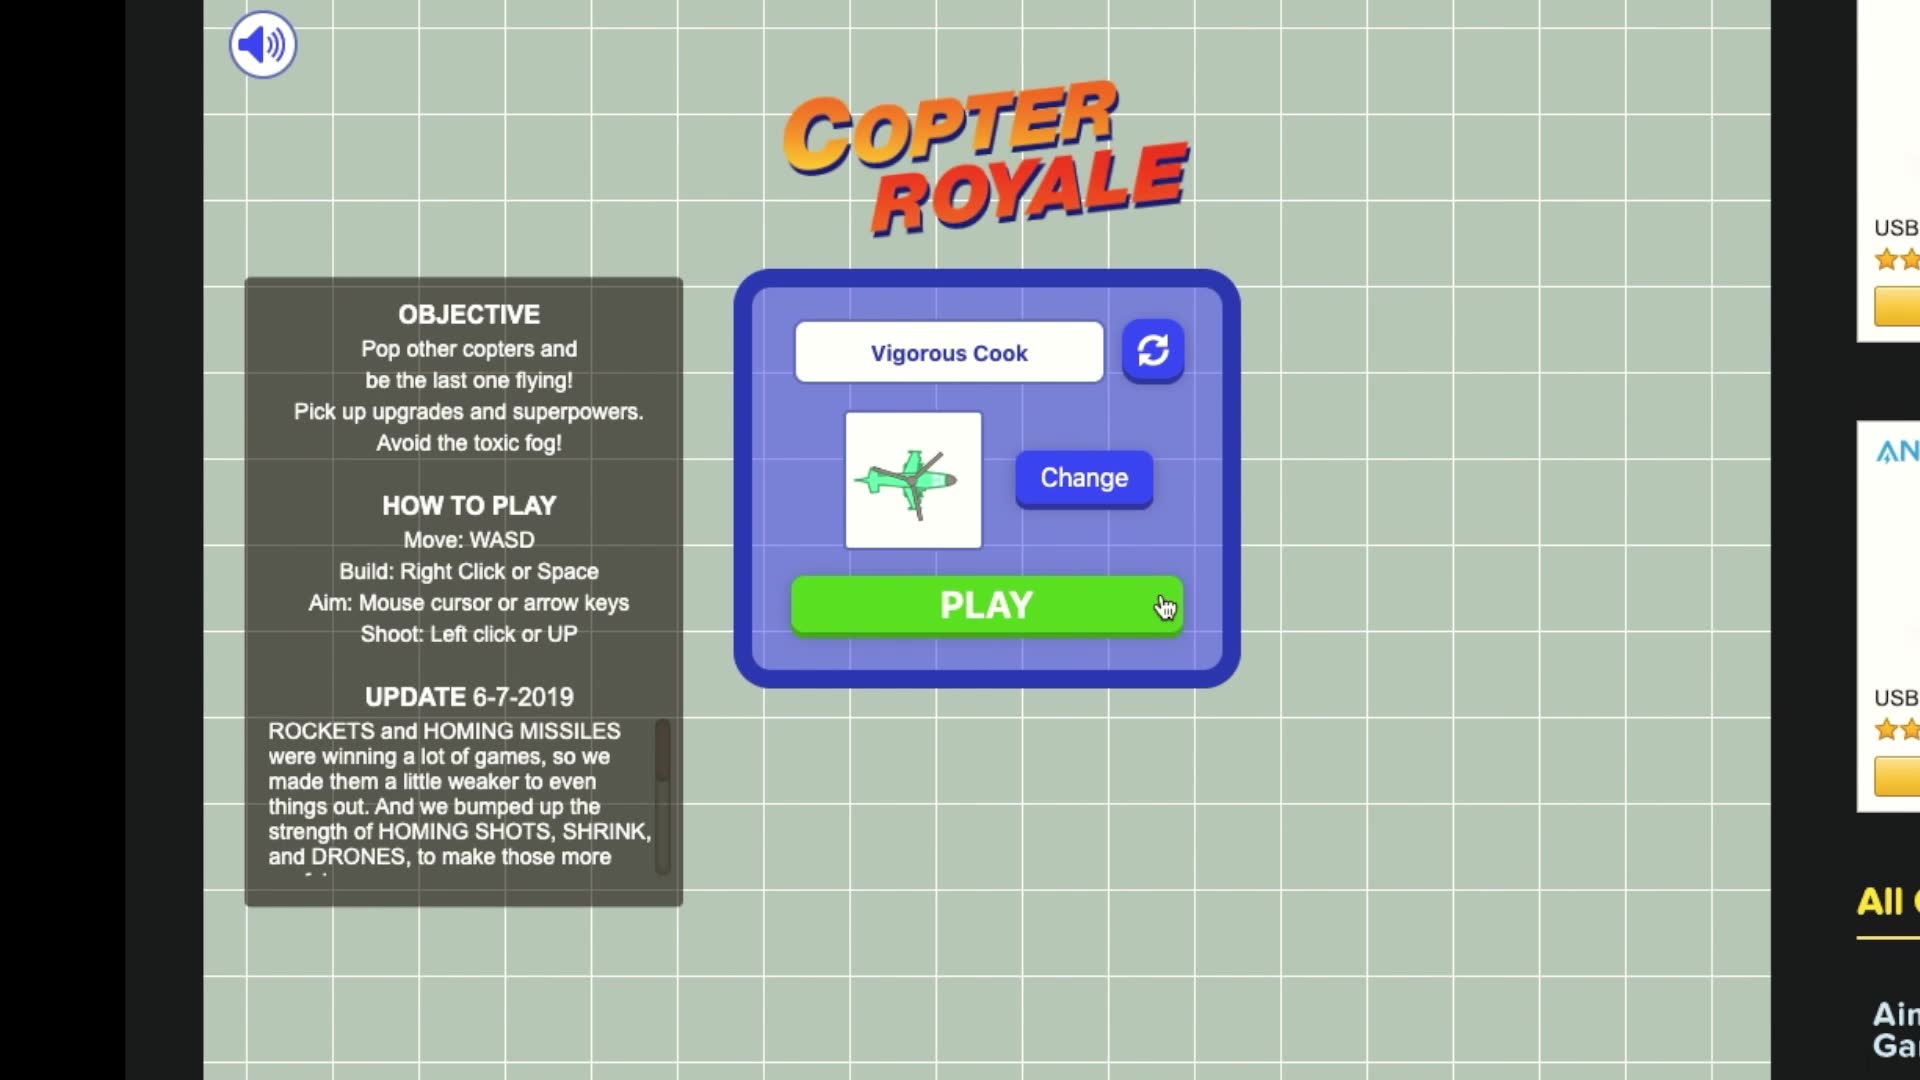 The Best Copter Royale Images